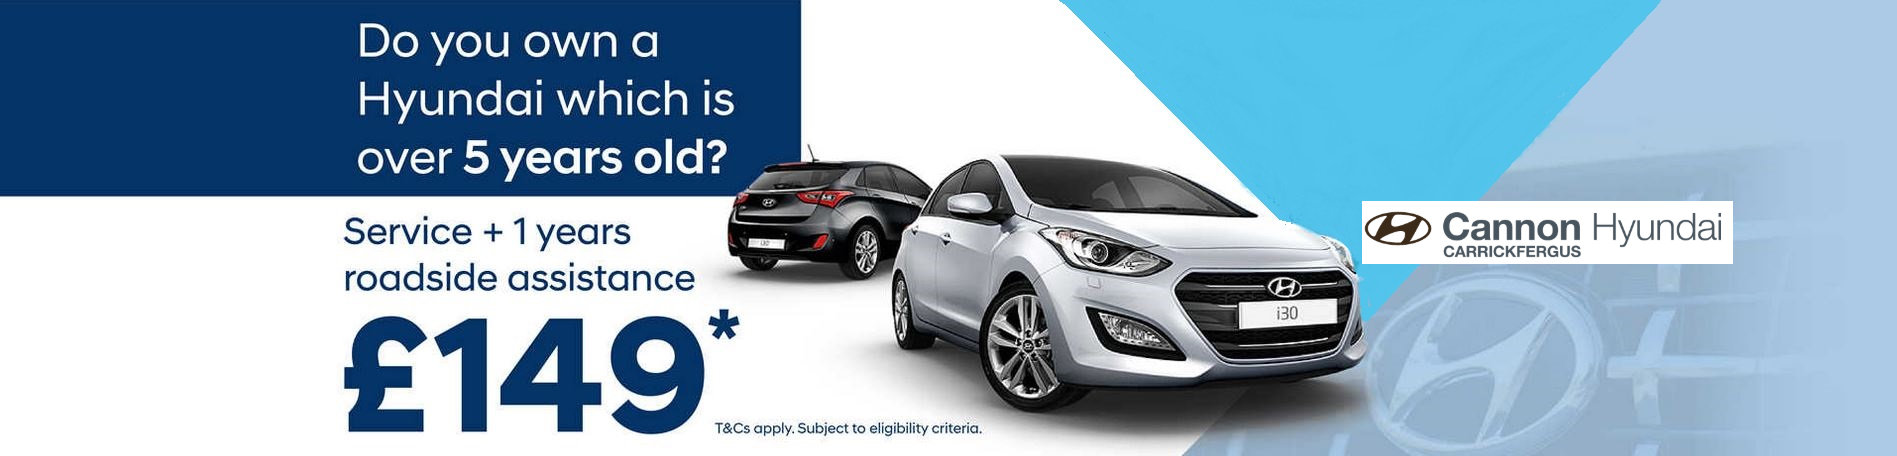 Hyundai Servicing Offer 5 Years or Older